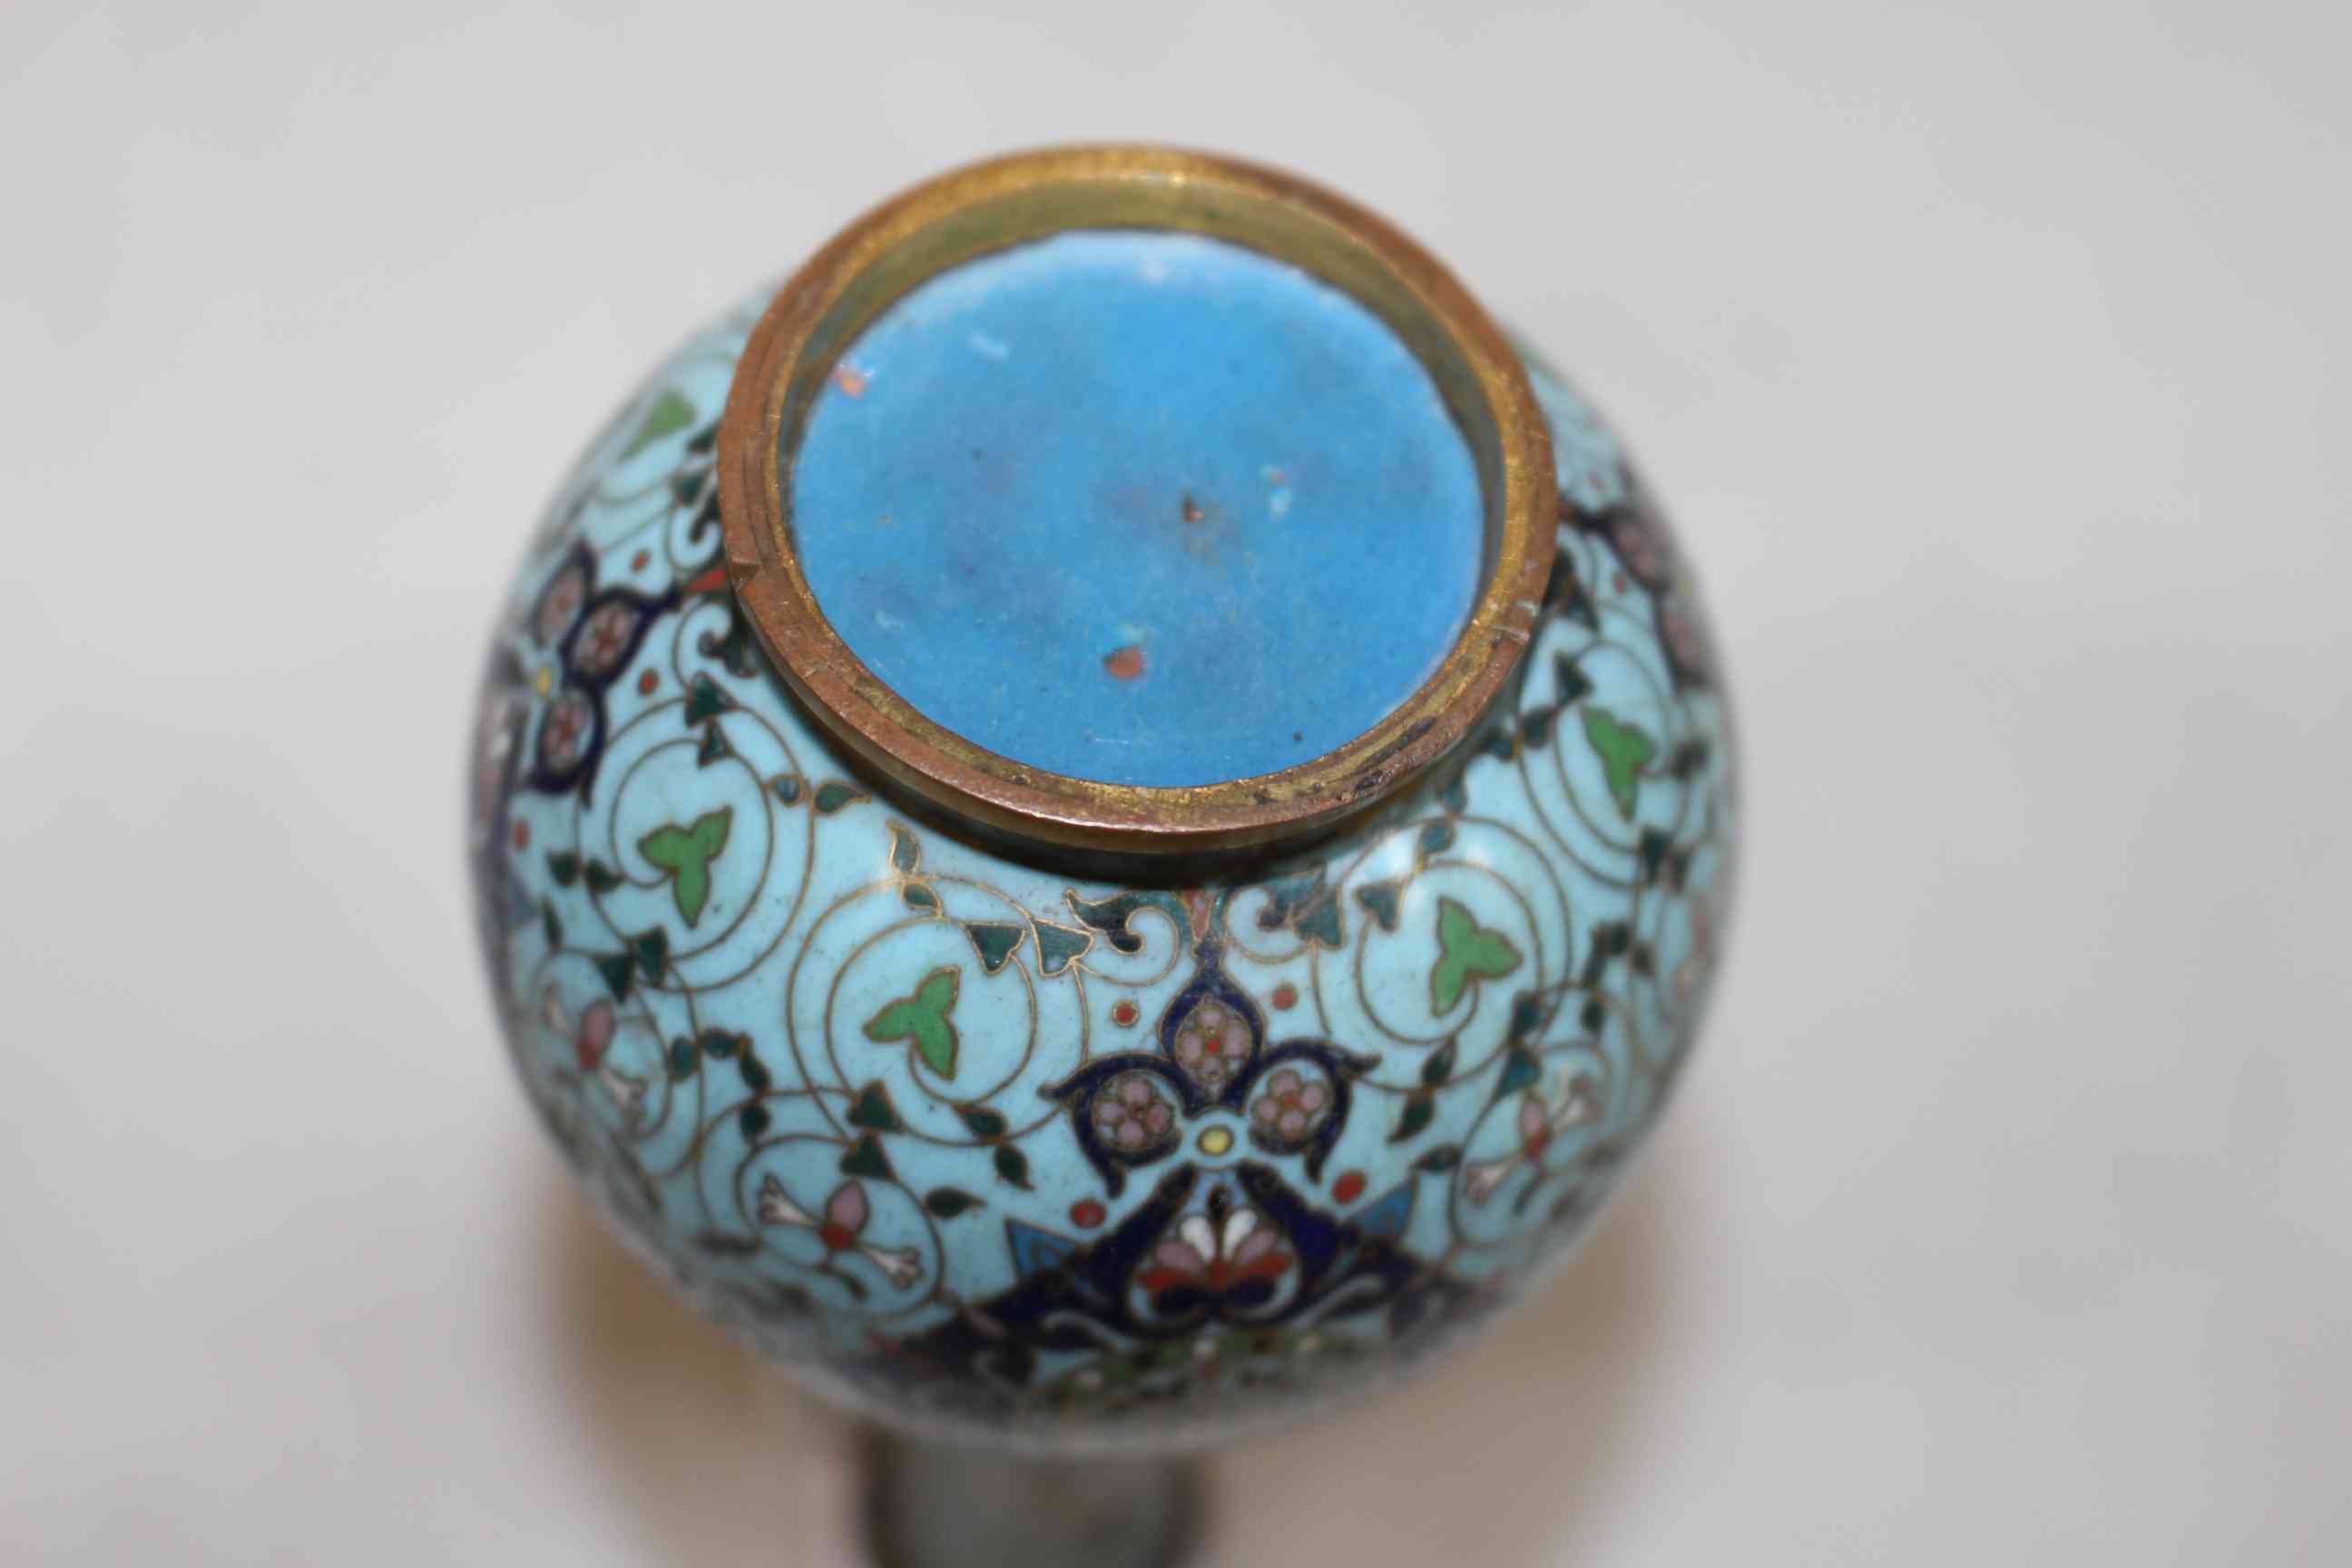 Fine antique Chinese cloisonne vase, with intricate decoration and scrolled side handles, 15cm high, - Image 2 of 5